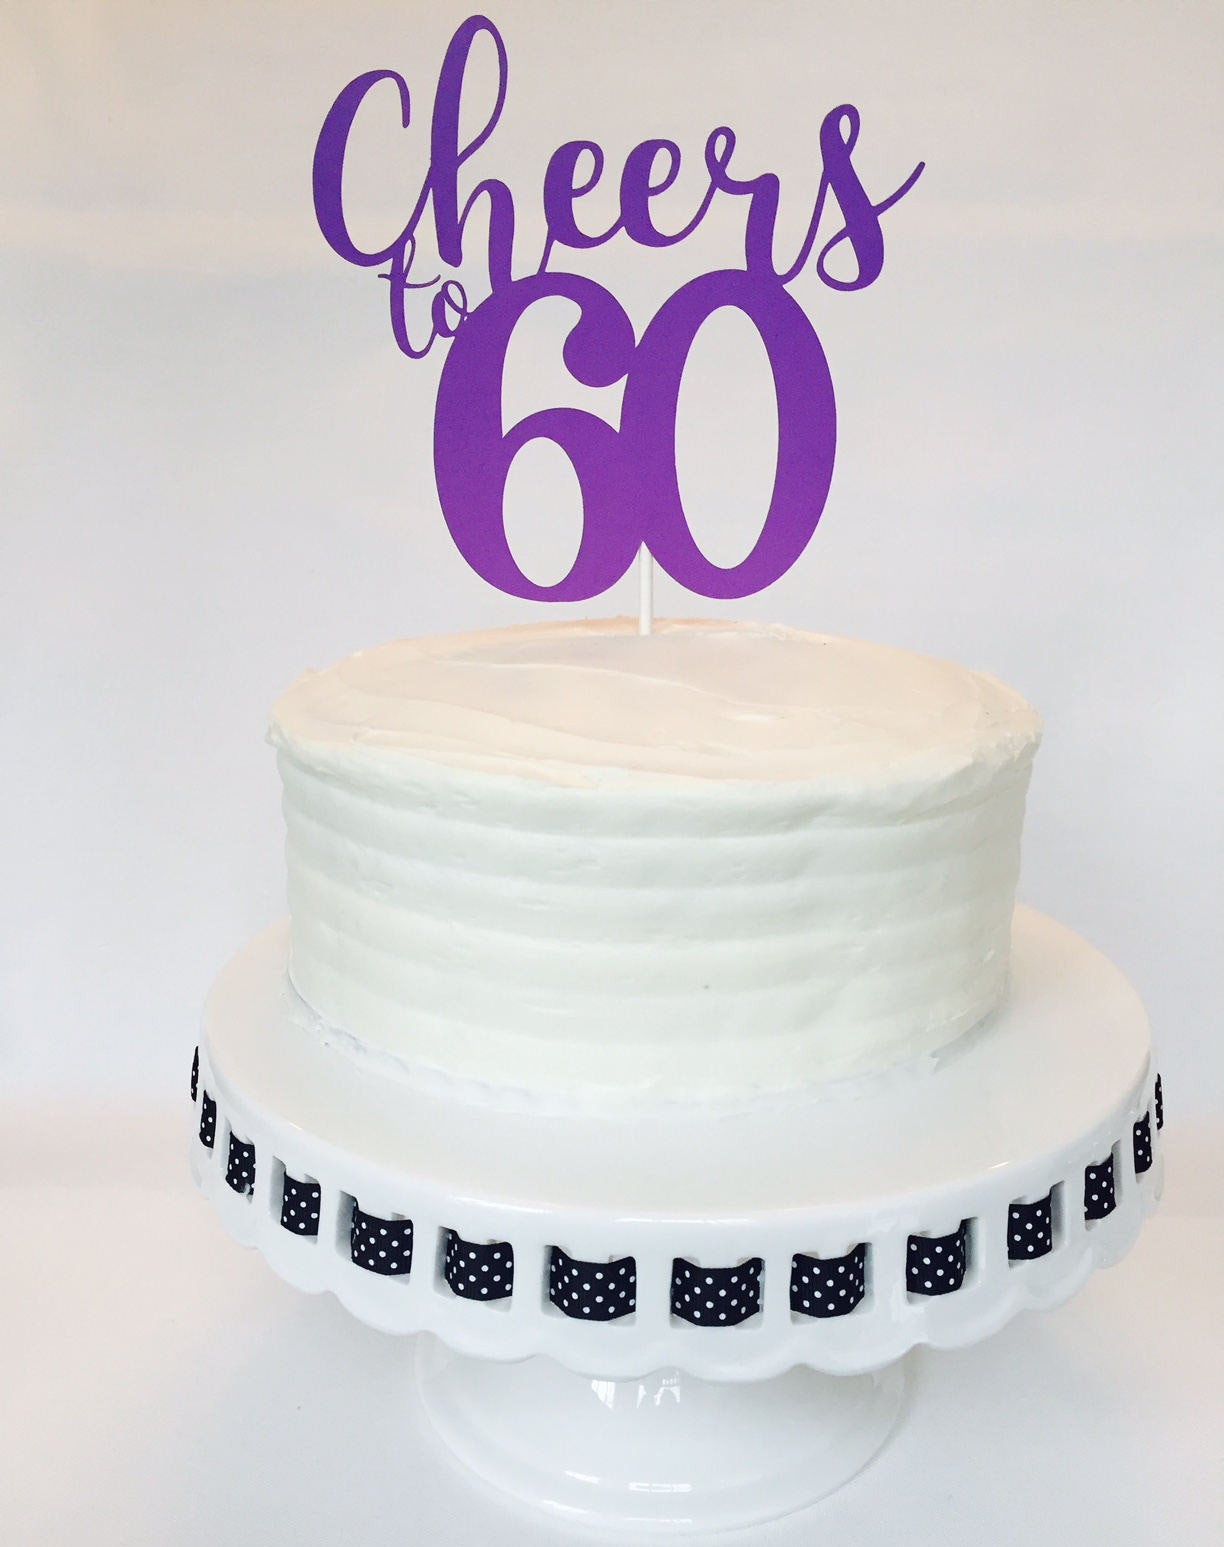 Best ideas about 60 Birthday Cake
. Save or Pin 60th Birthday Cake Topper Cheers to 60 Birthday Cake Now.